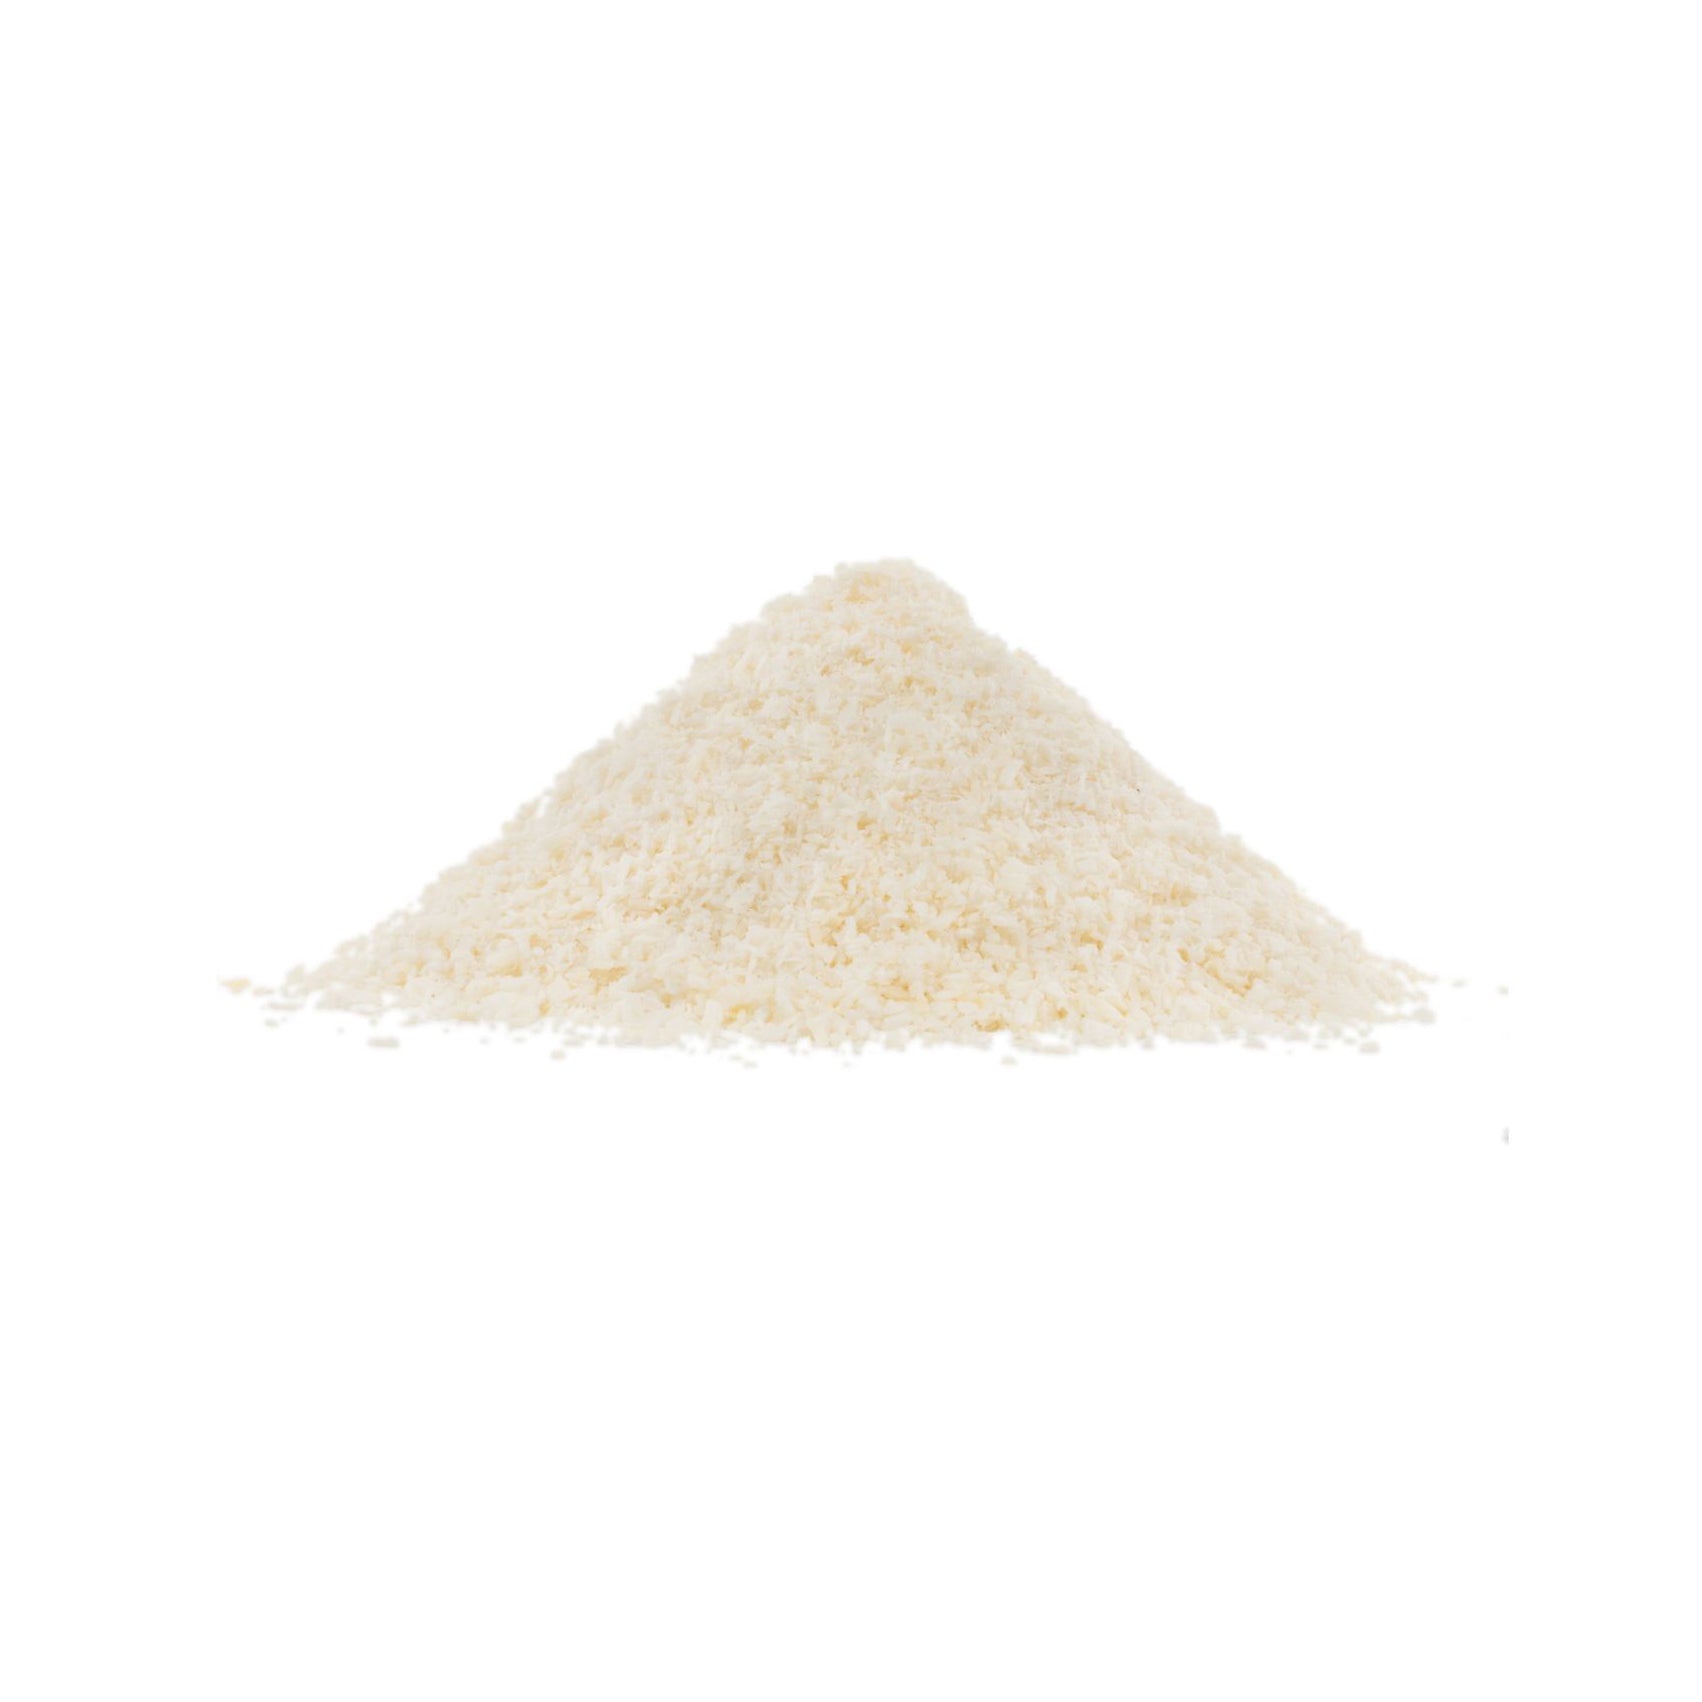 BOB'S RED MILL Shredded Coconut, Unsweetened, 340g